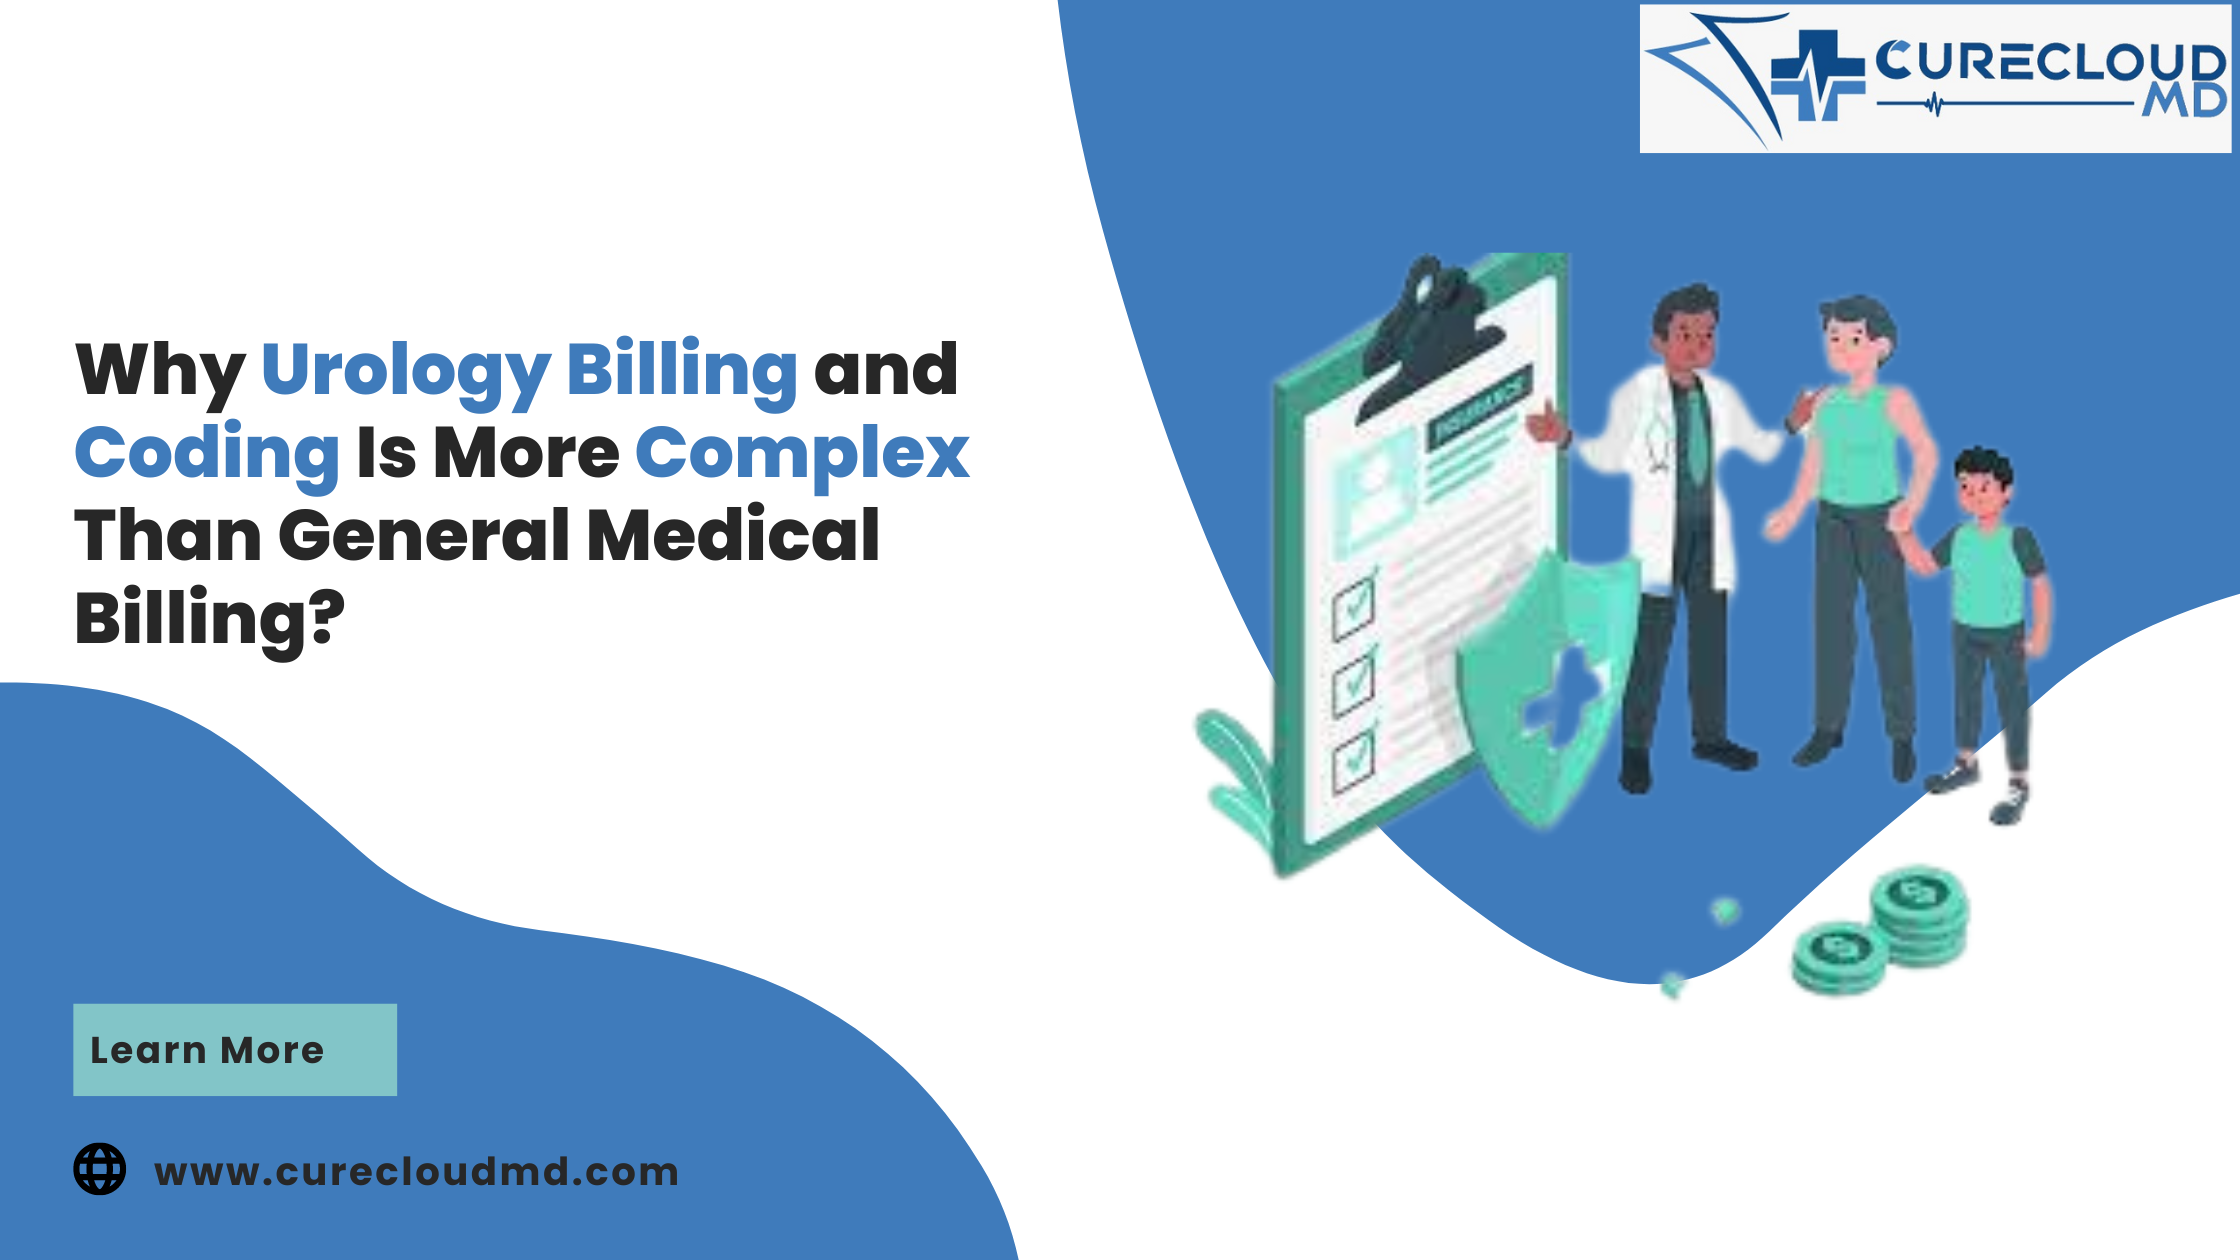 Why Urology Billing and Coding Is More Complex Than General Medical Billing